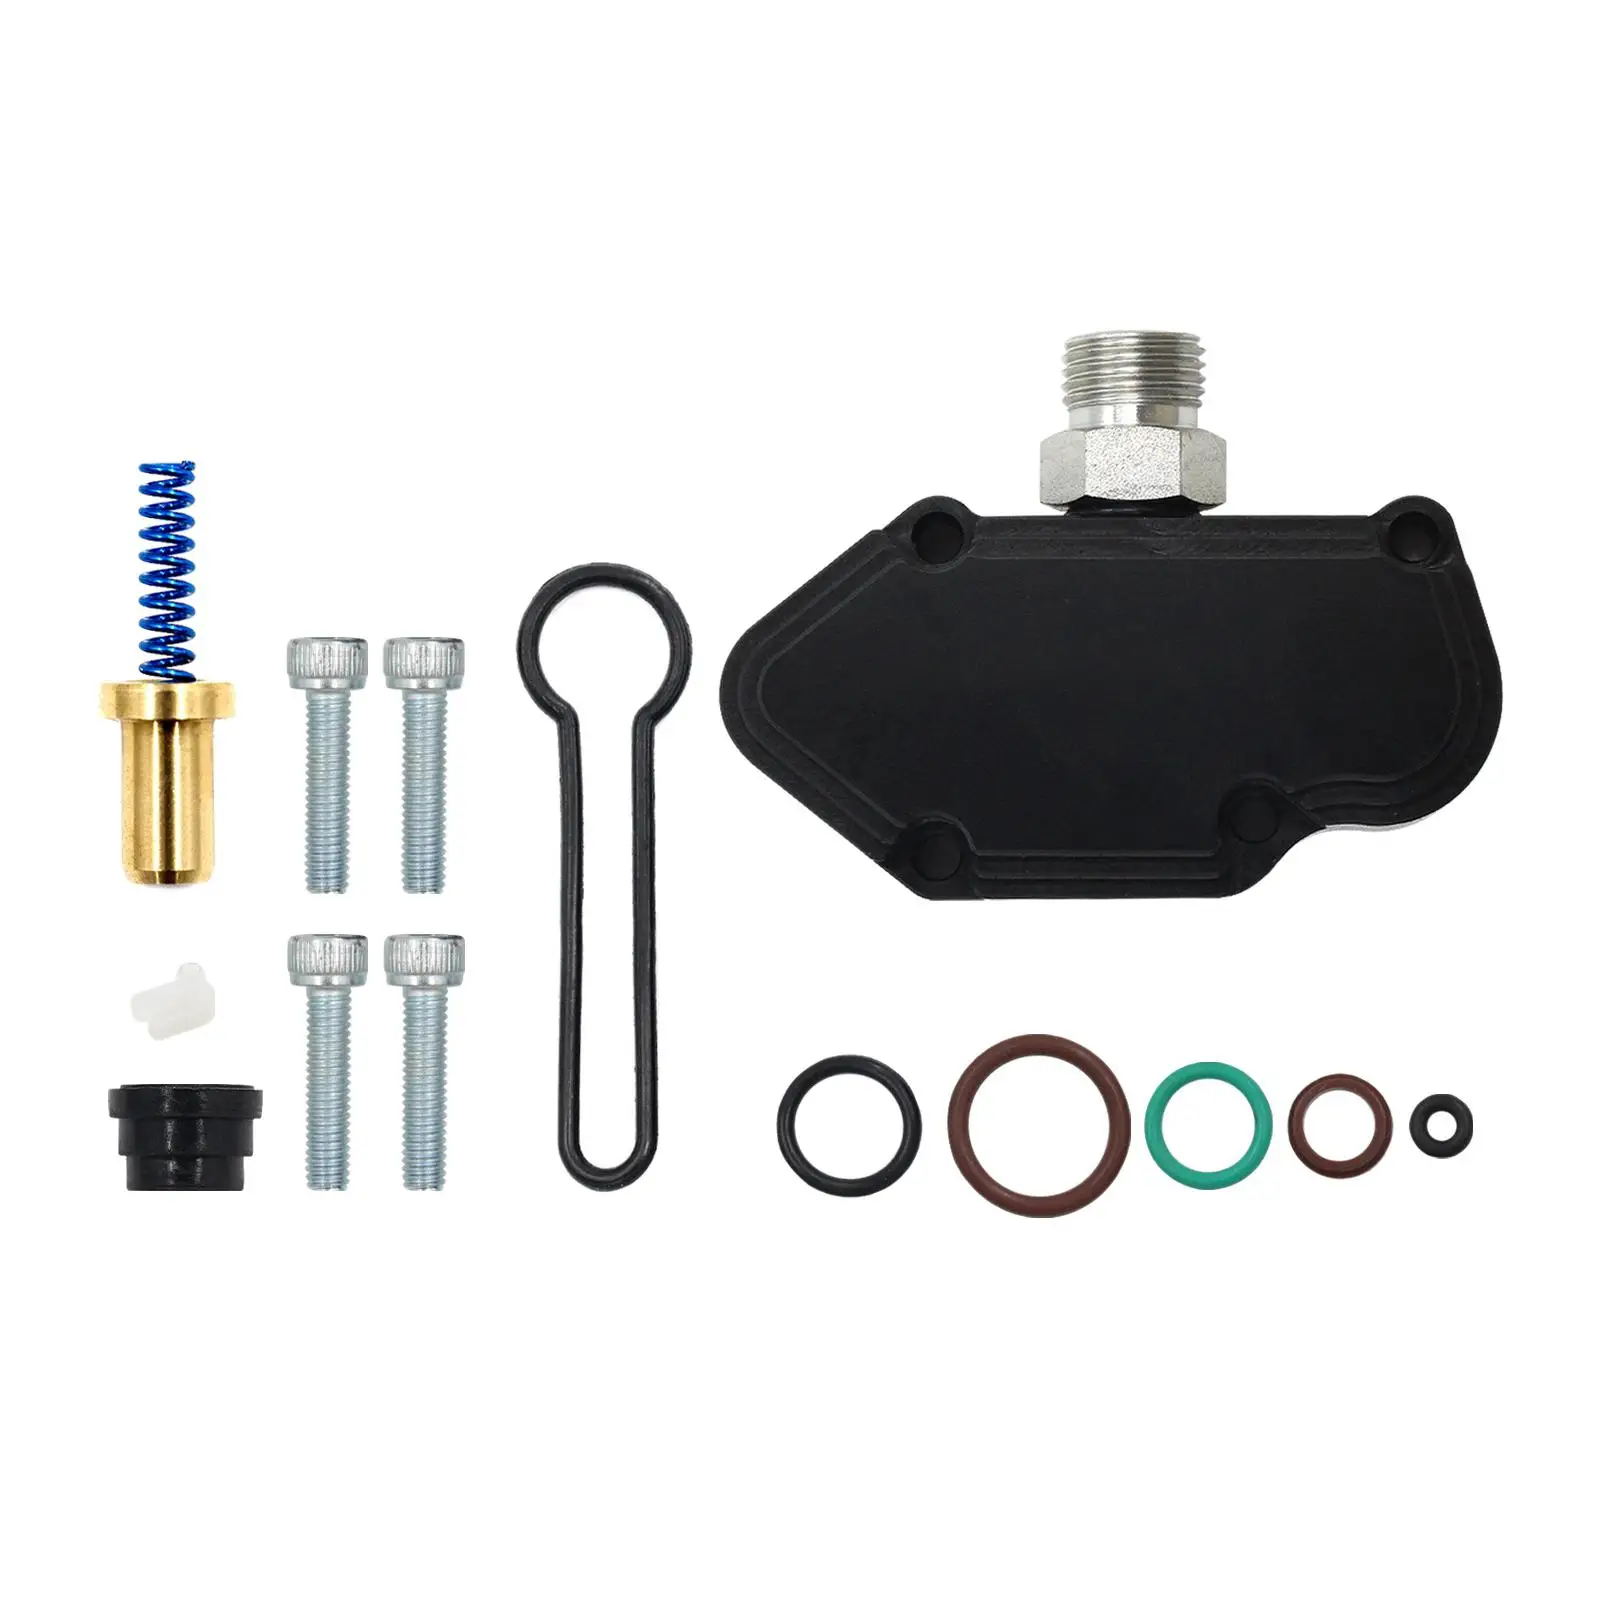 Blue Spring Kits Convenient Replace Adjustable for 2003-2007 Powerstroke